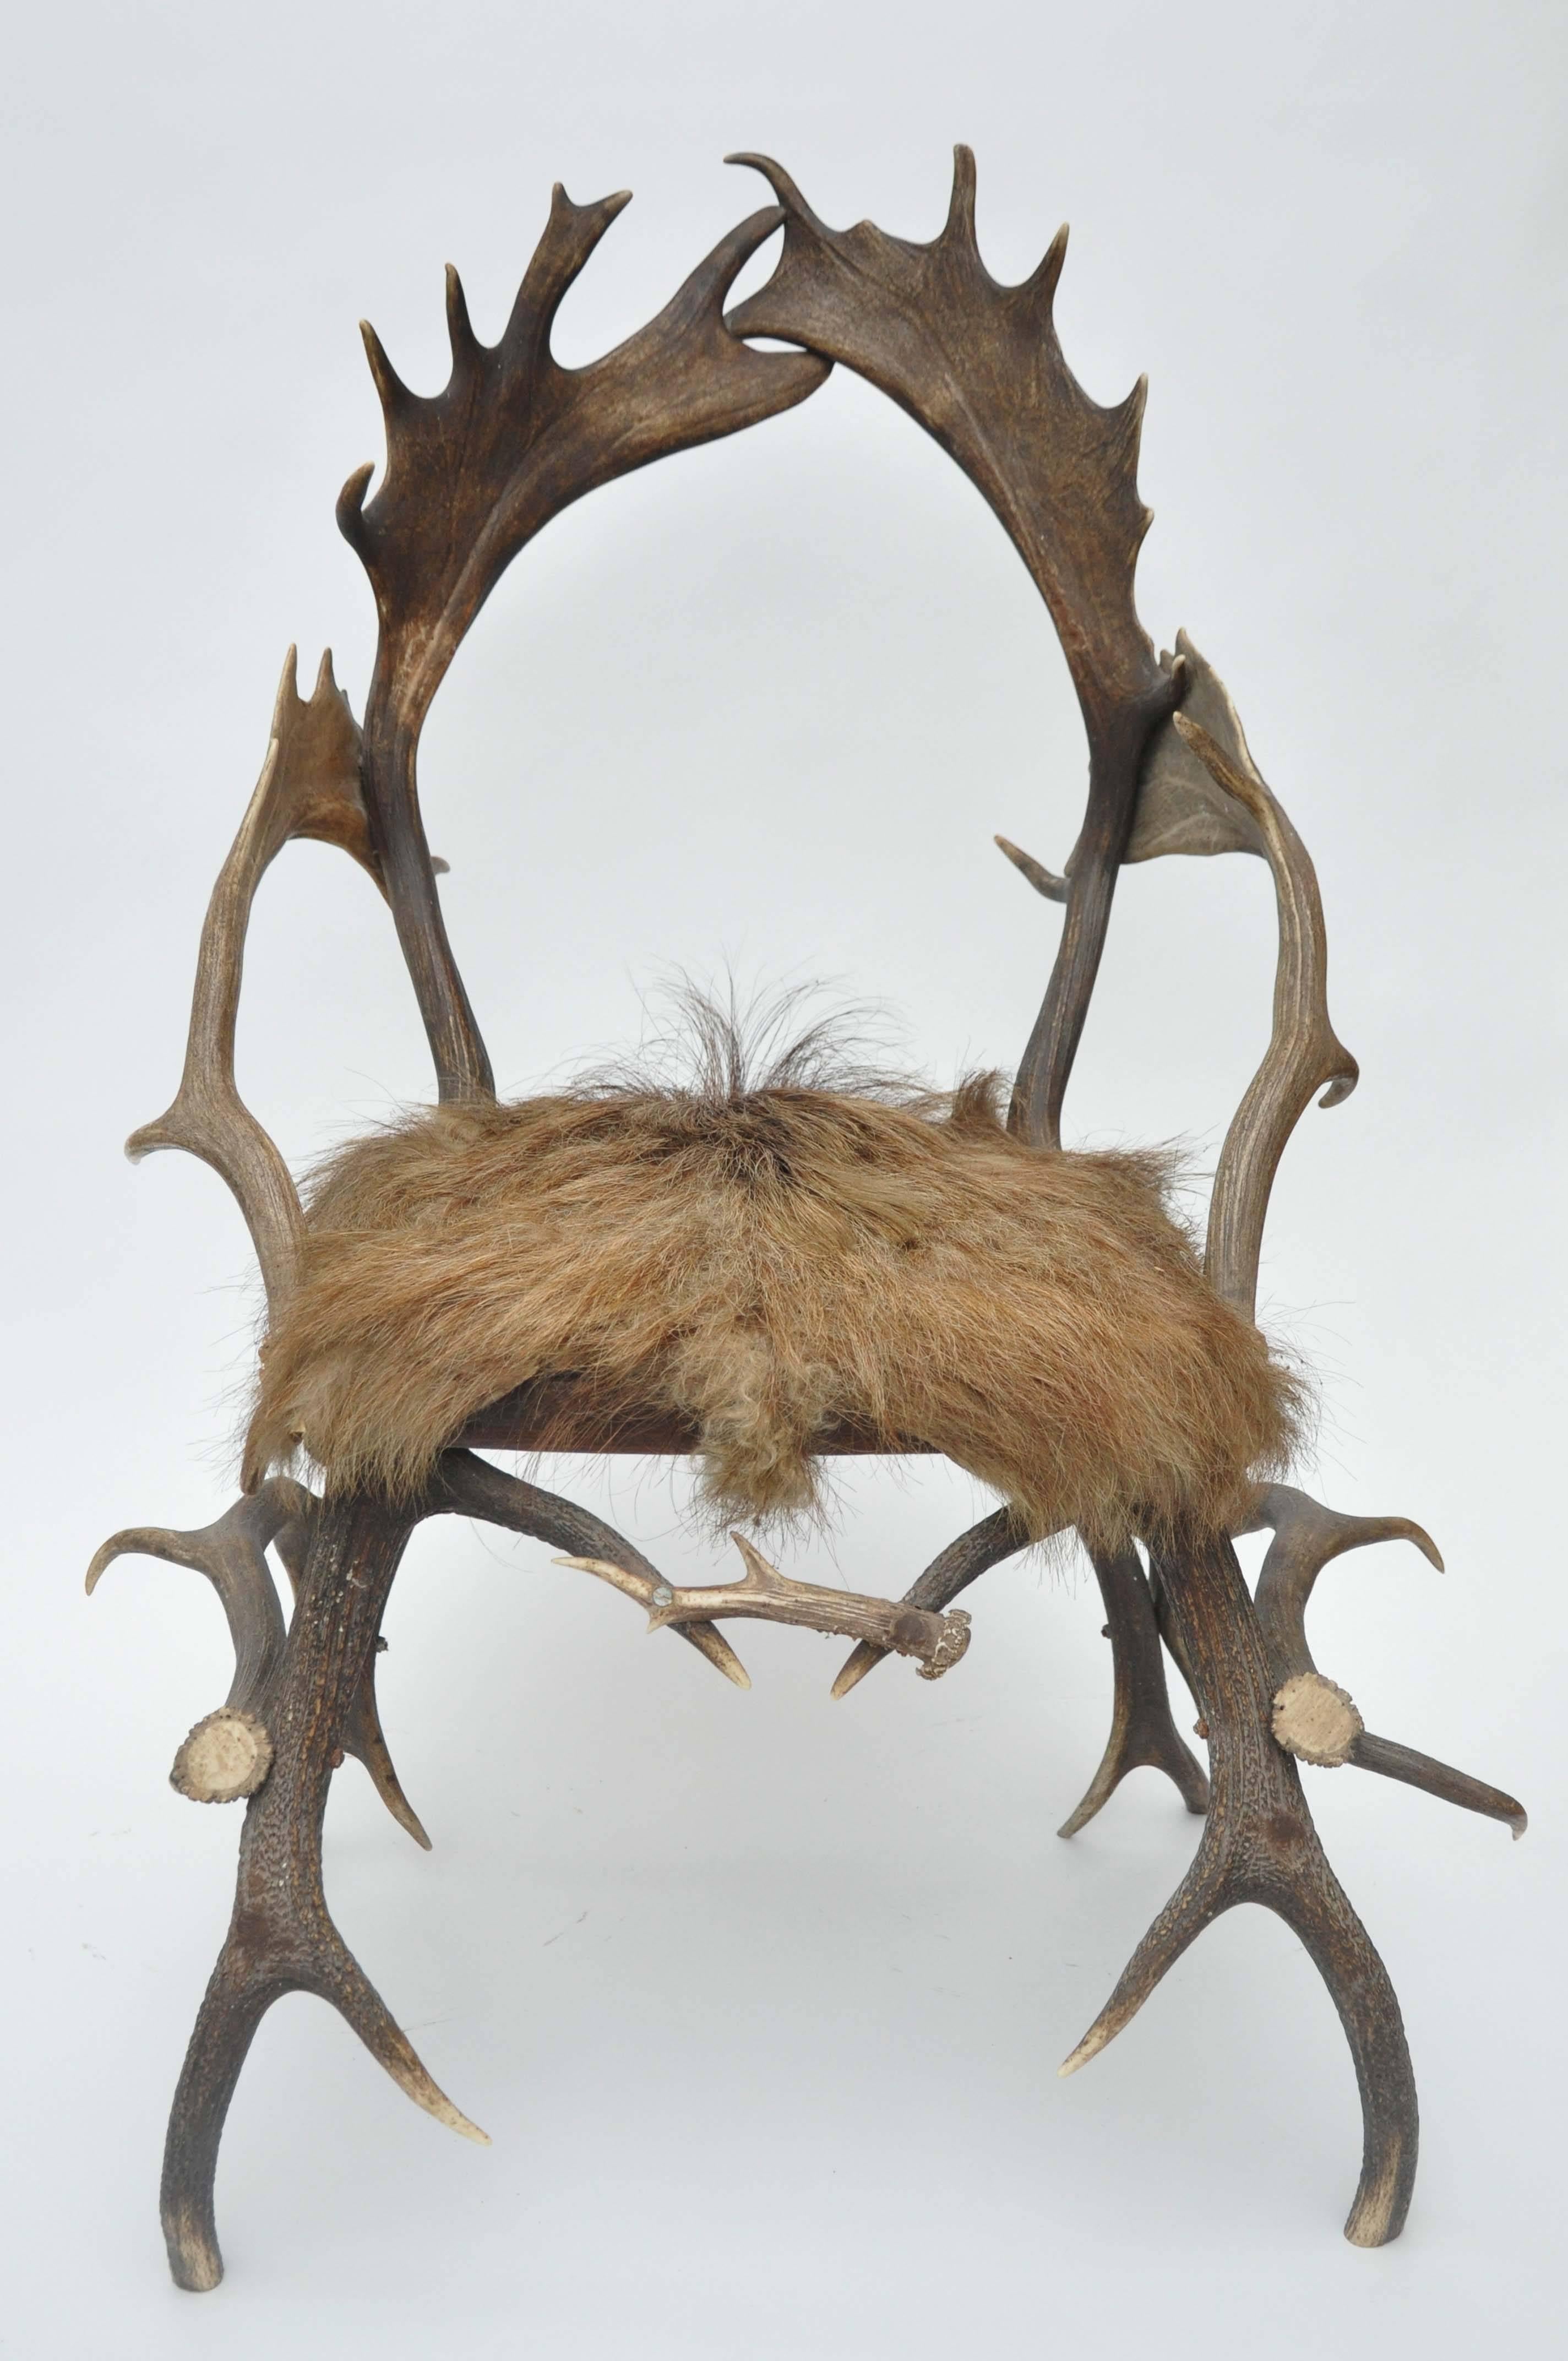 Early 19th century elk antler chair from Germany with natural boar hair seat. Found outside of Munich. Made in the late 1800s the work is in keeping with the standards of the original Bavarian makers of fine antler and horn furniture. 
This is not a